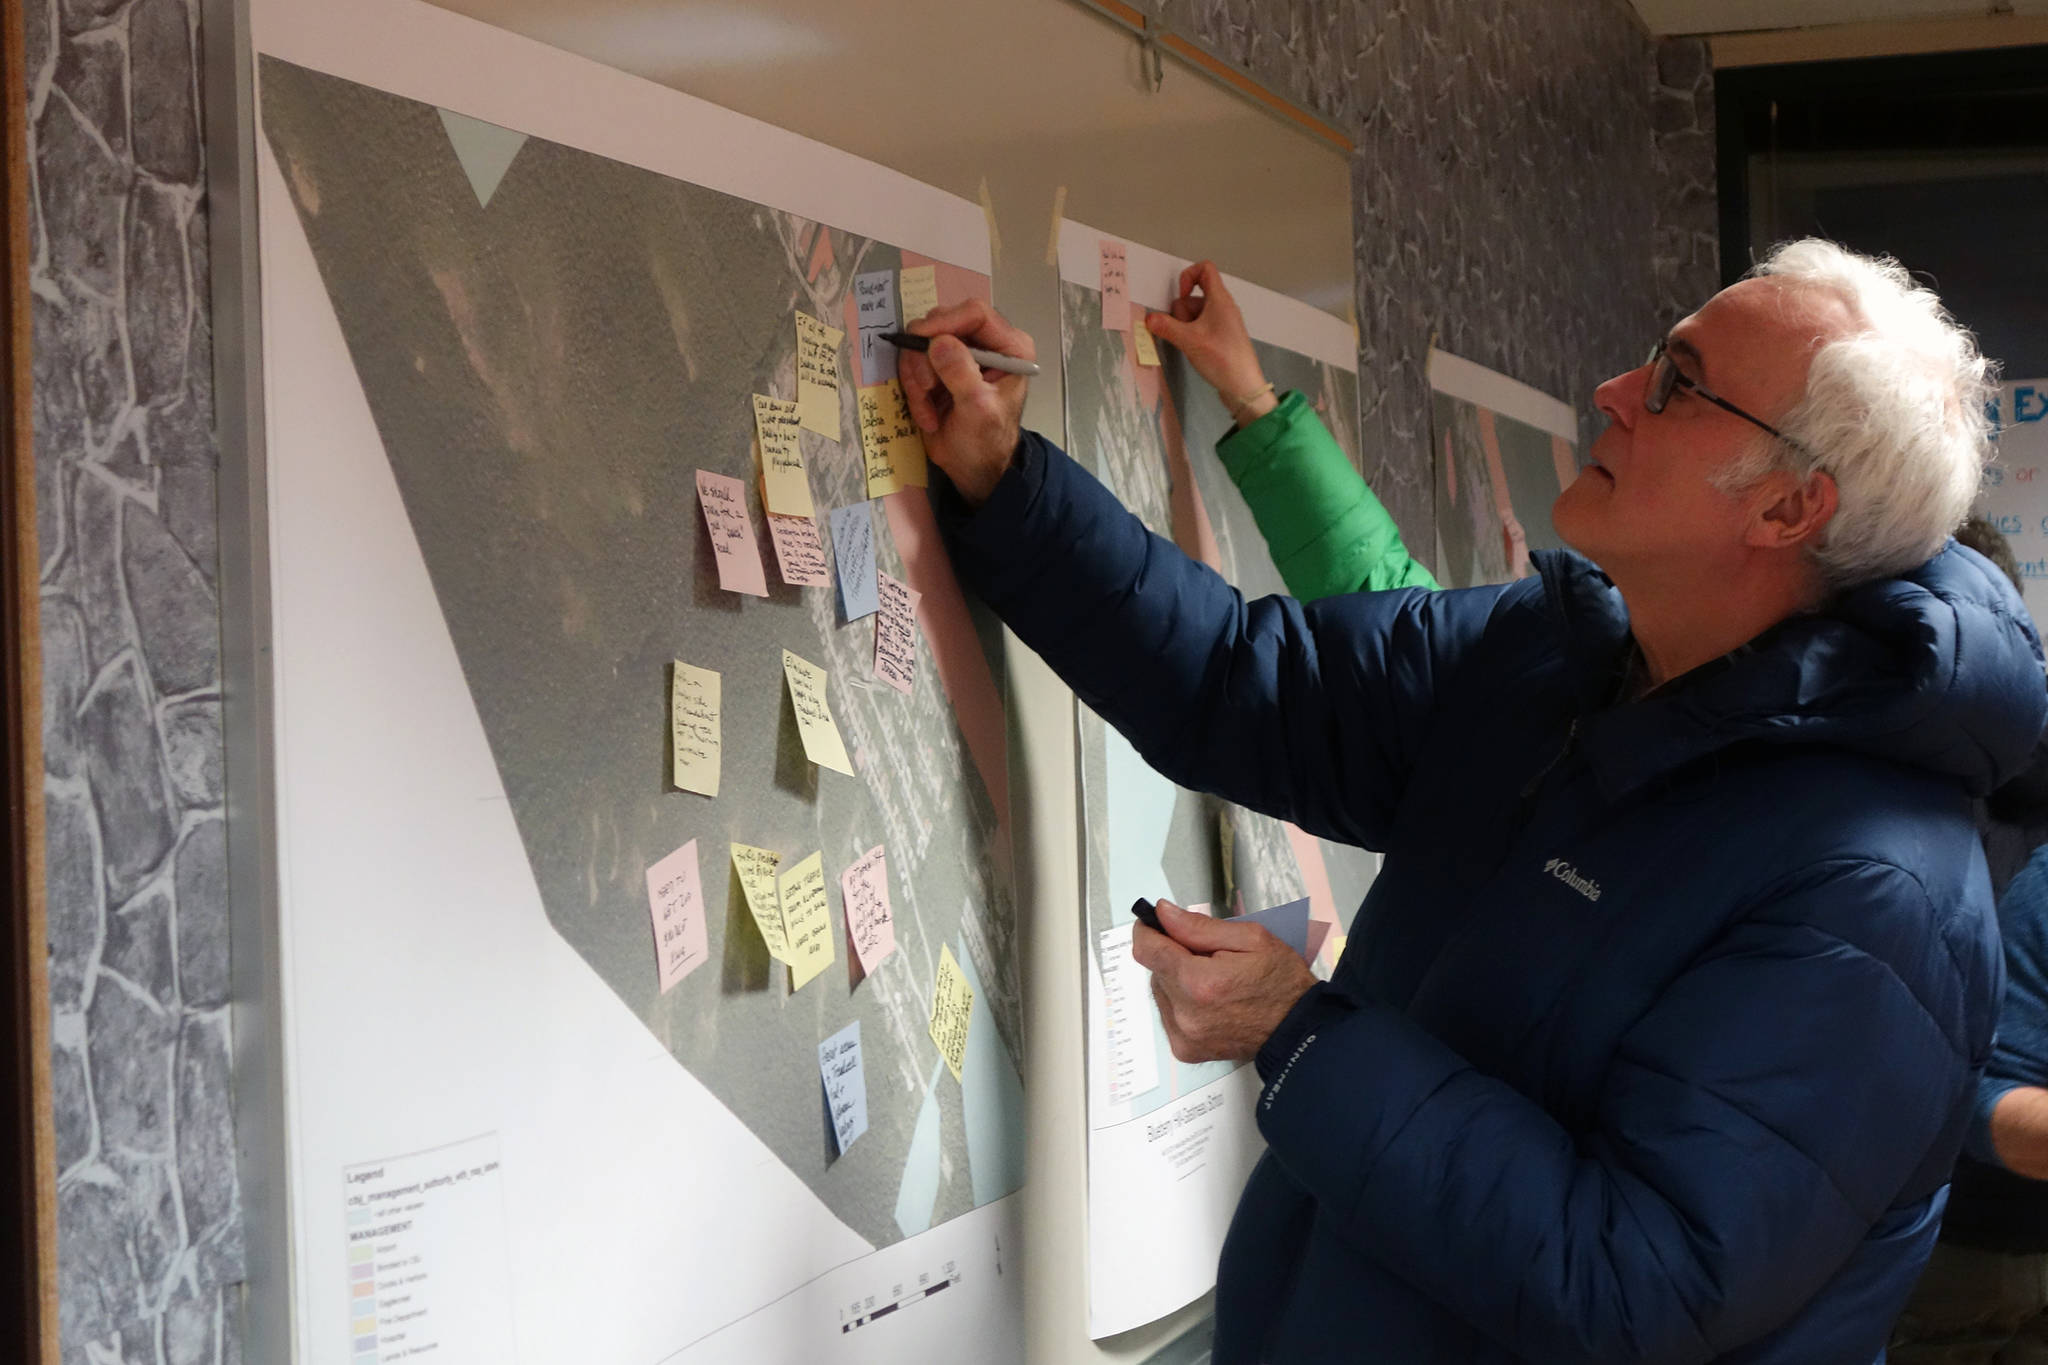 Kevin Ritchie adds a comment to a map at a kickoff meeting for City and Borough of Juneau’s effort to create South Douglas-West Juneau Area Plan, Wednesday, Jan. 15. (Ben Hohenstatt | Juneau Empire)